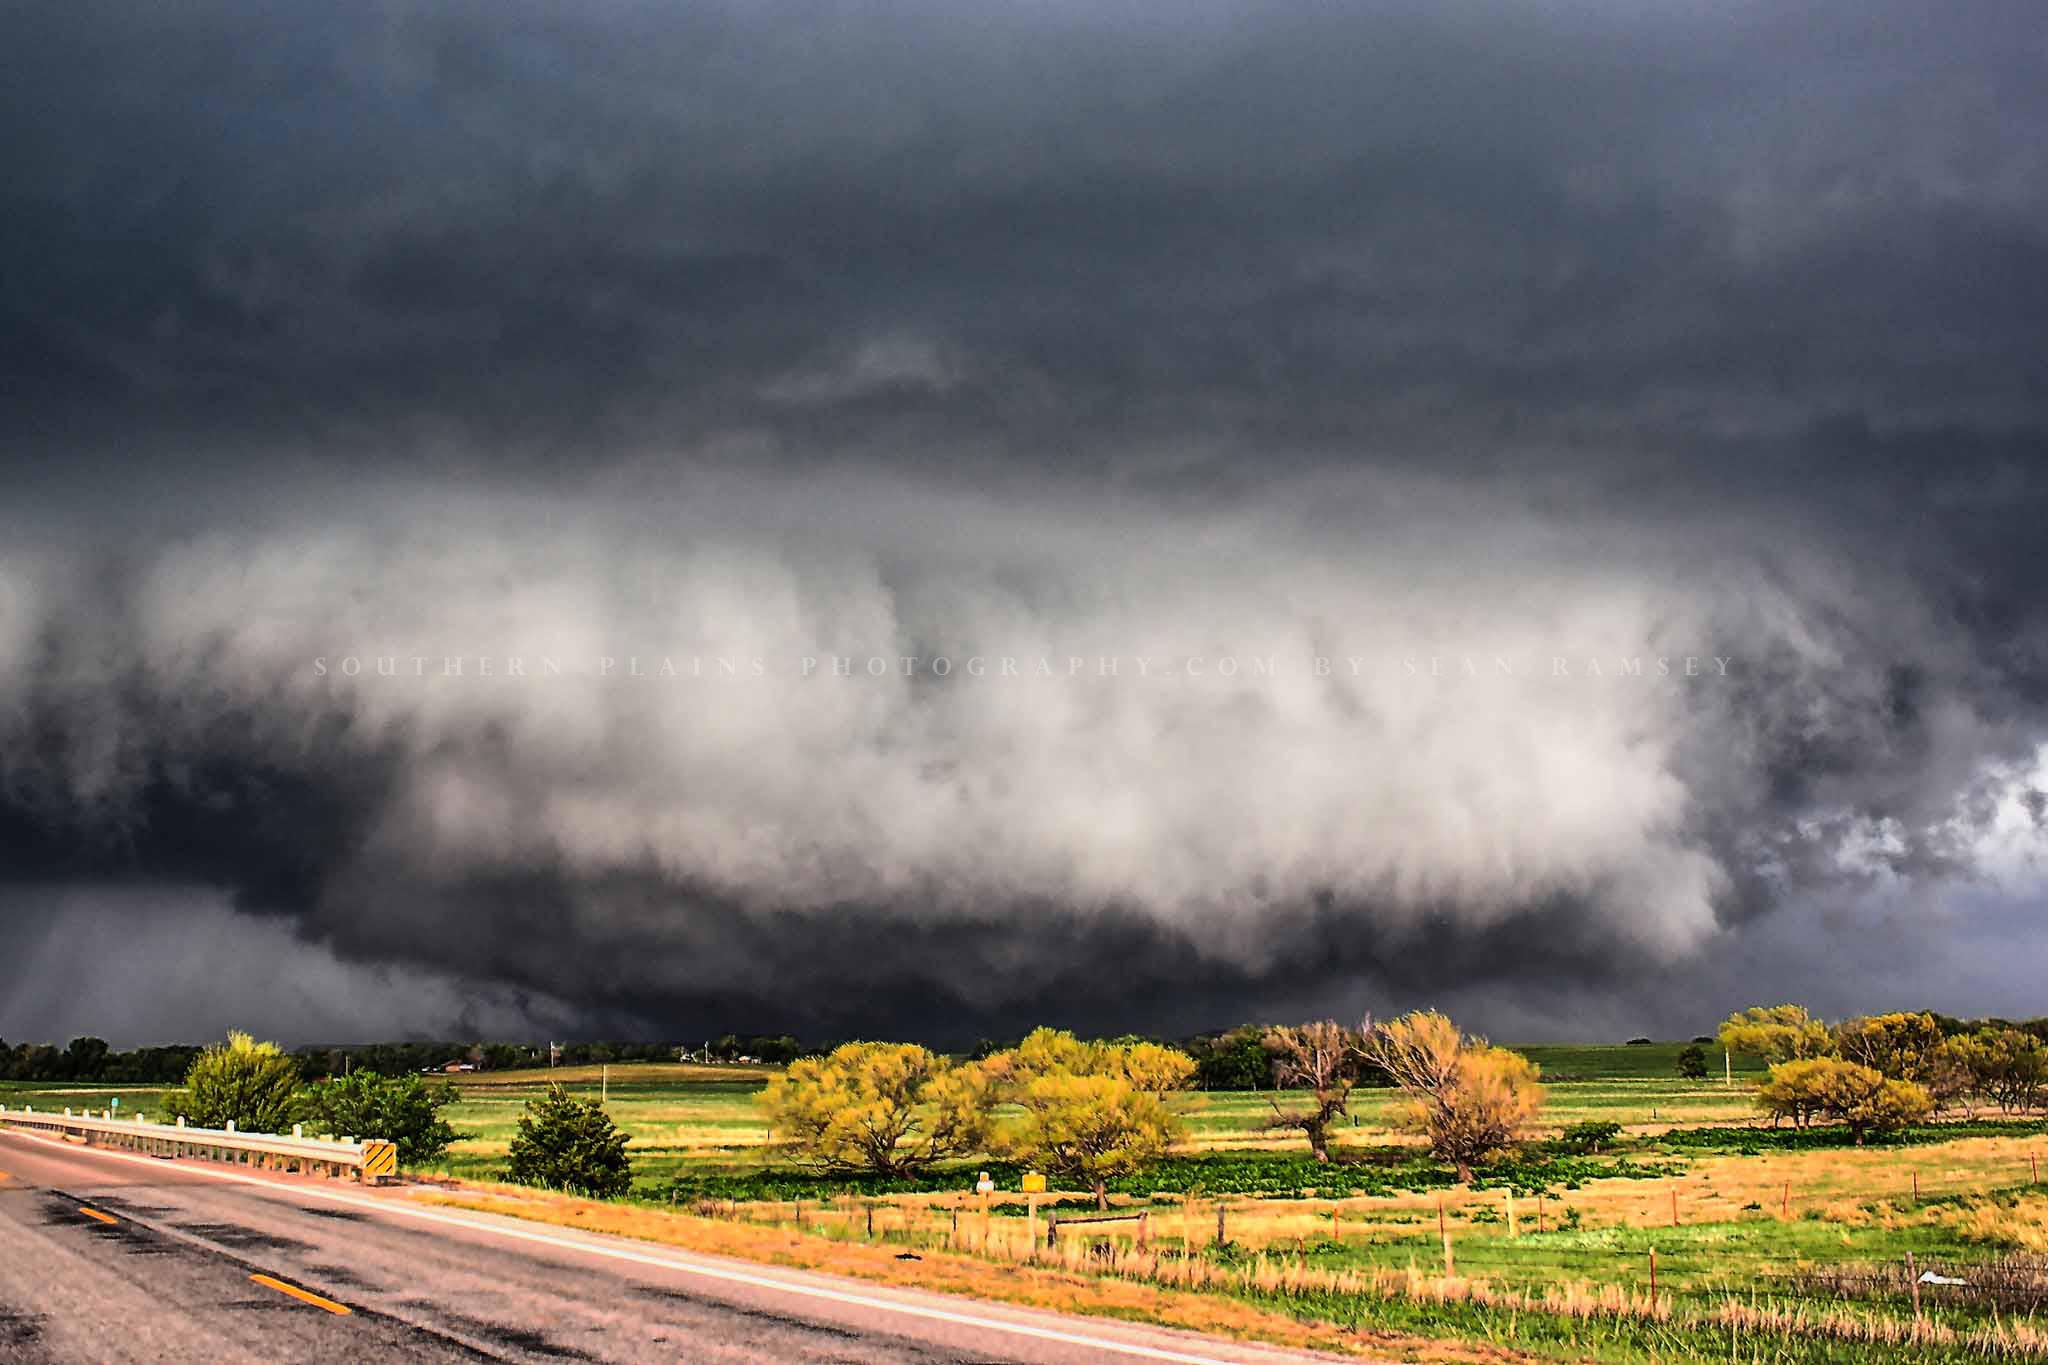 Storm photography print of a wide tornado touching down over a field on a stormy spring day in Oklahoma by Sean Ramsey of Southern Plains Photography.